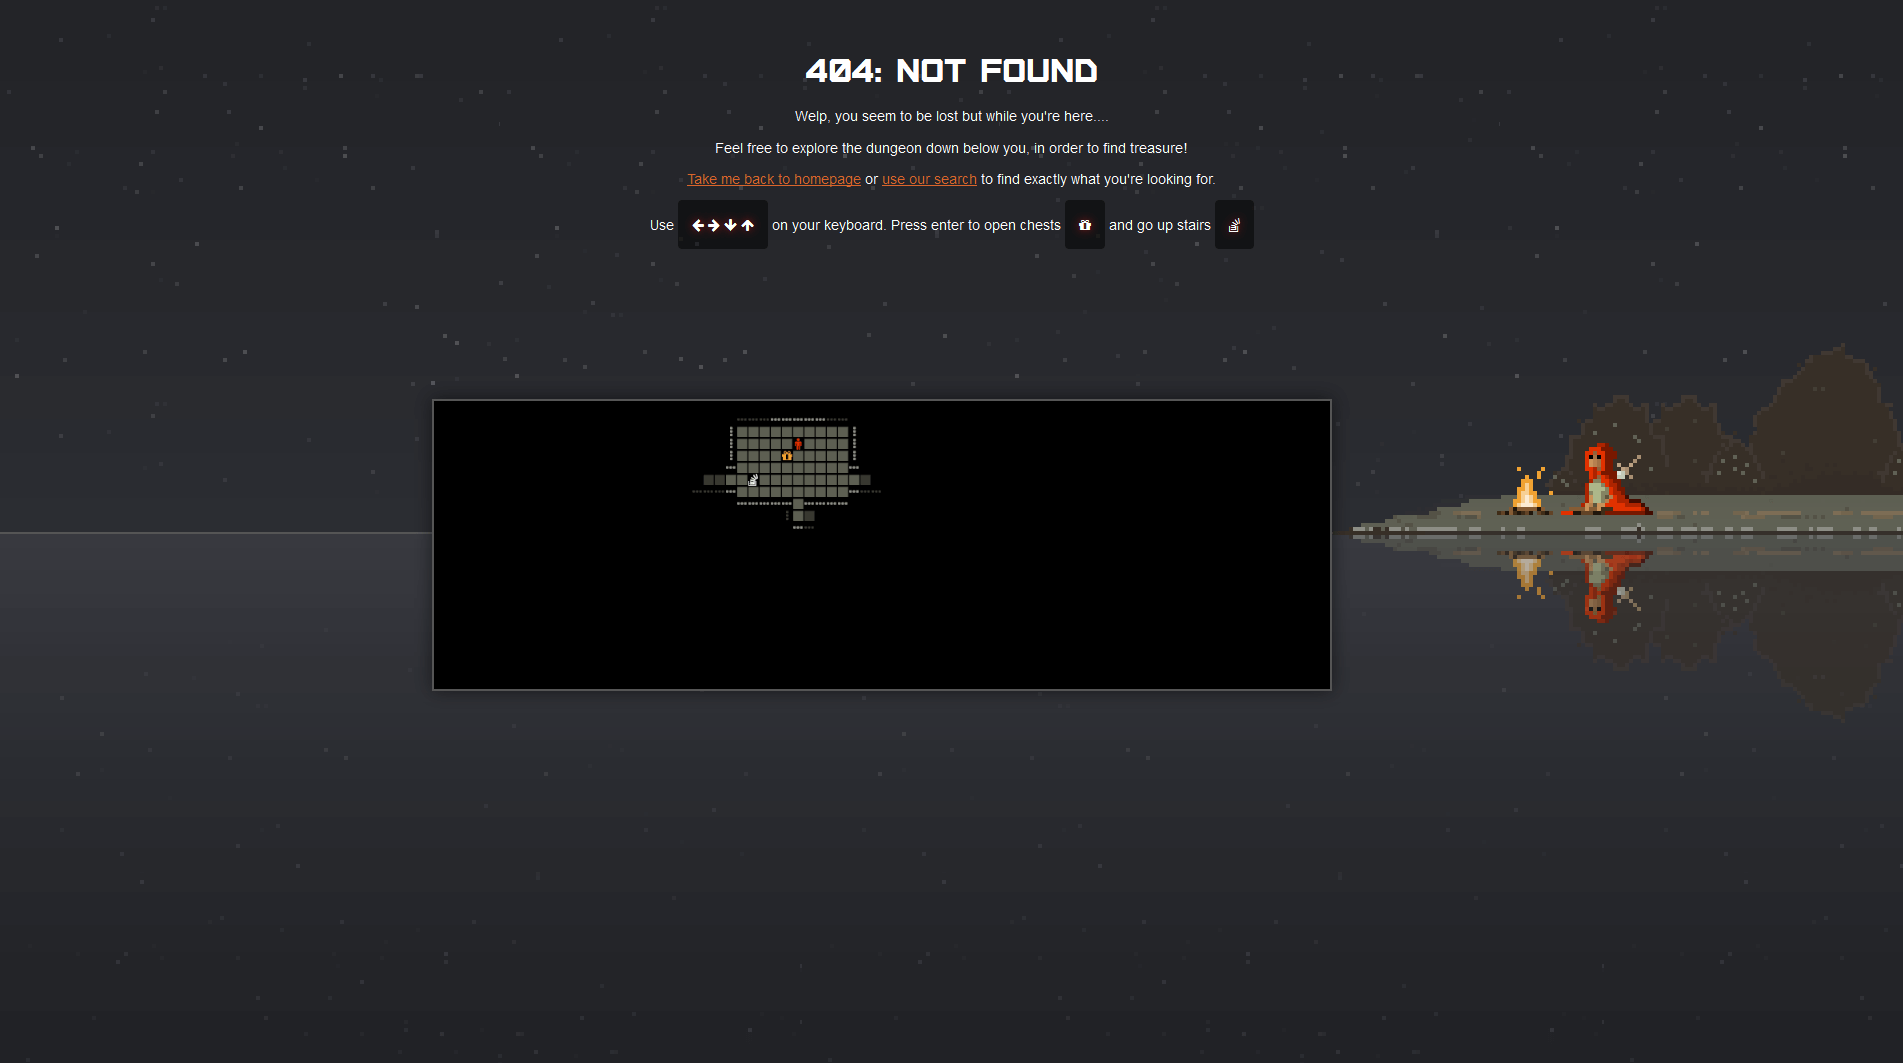 404 page for Gamespot